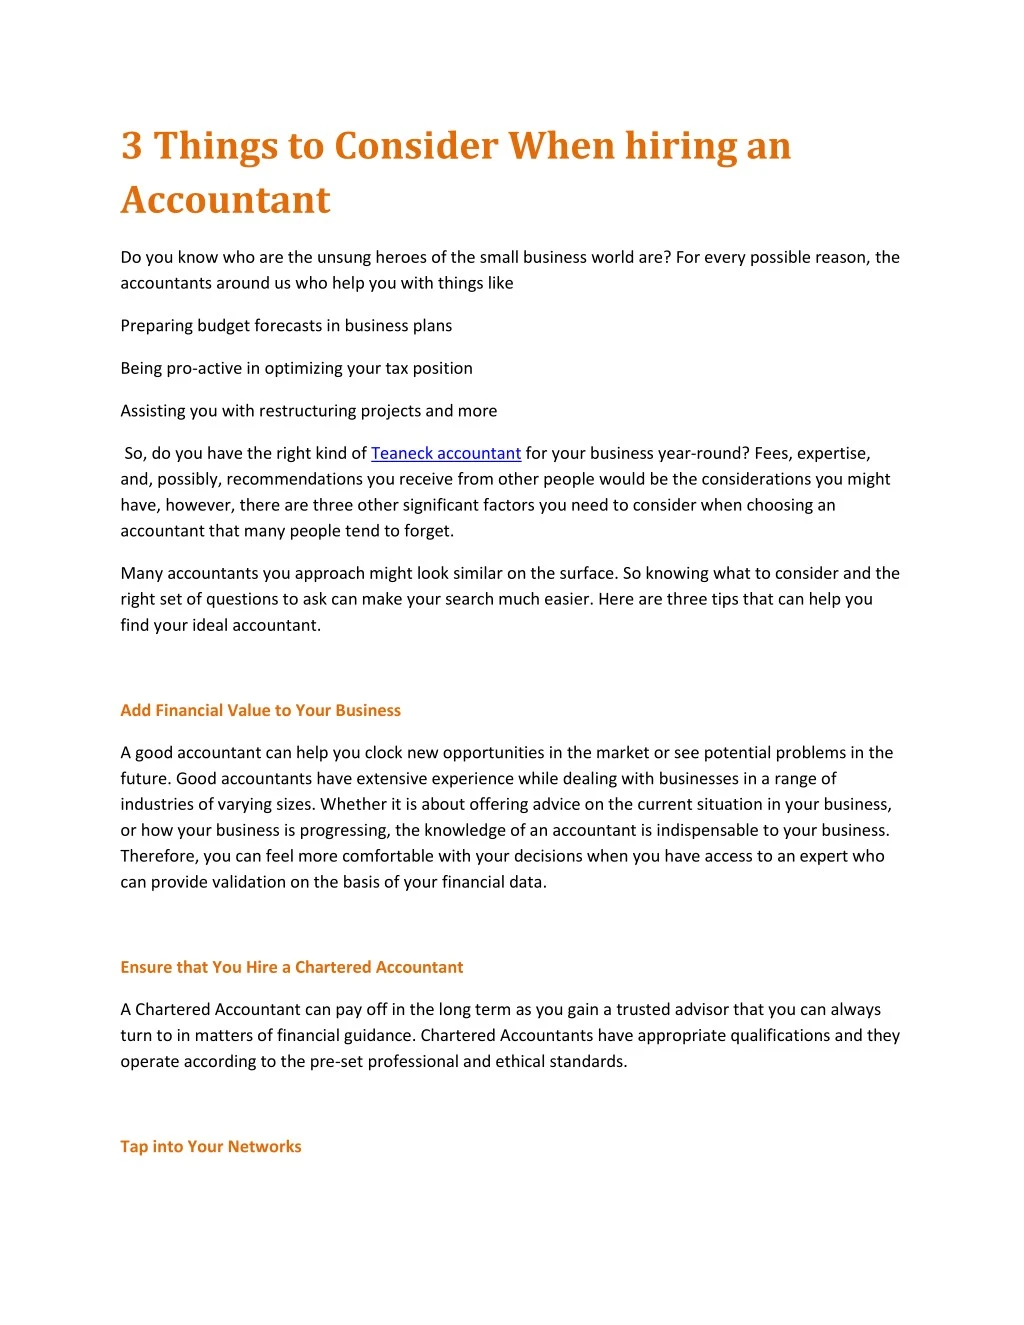 3 things to consider when hiring an accountant